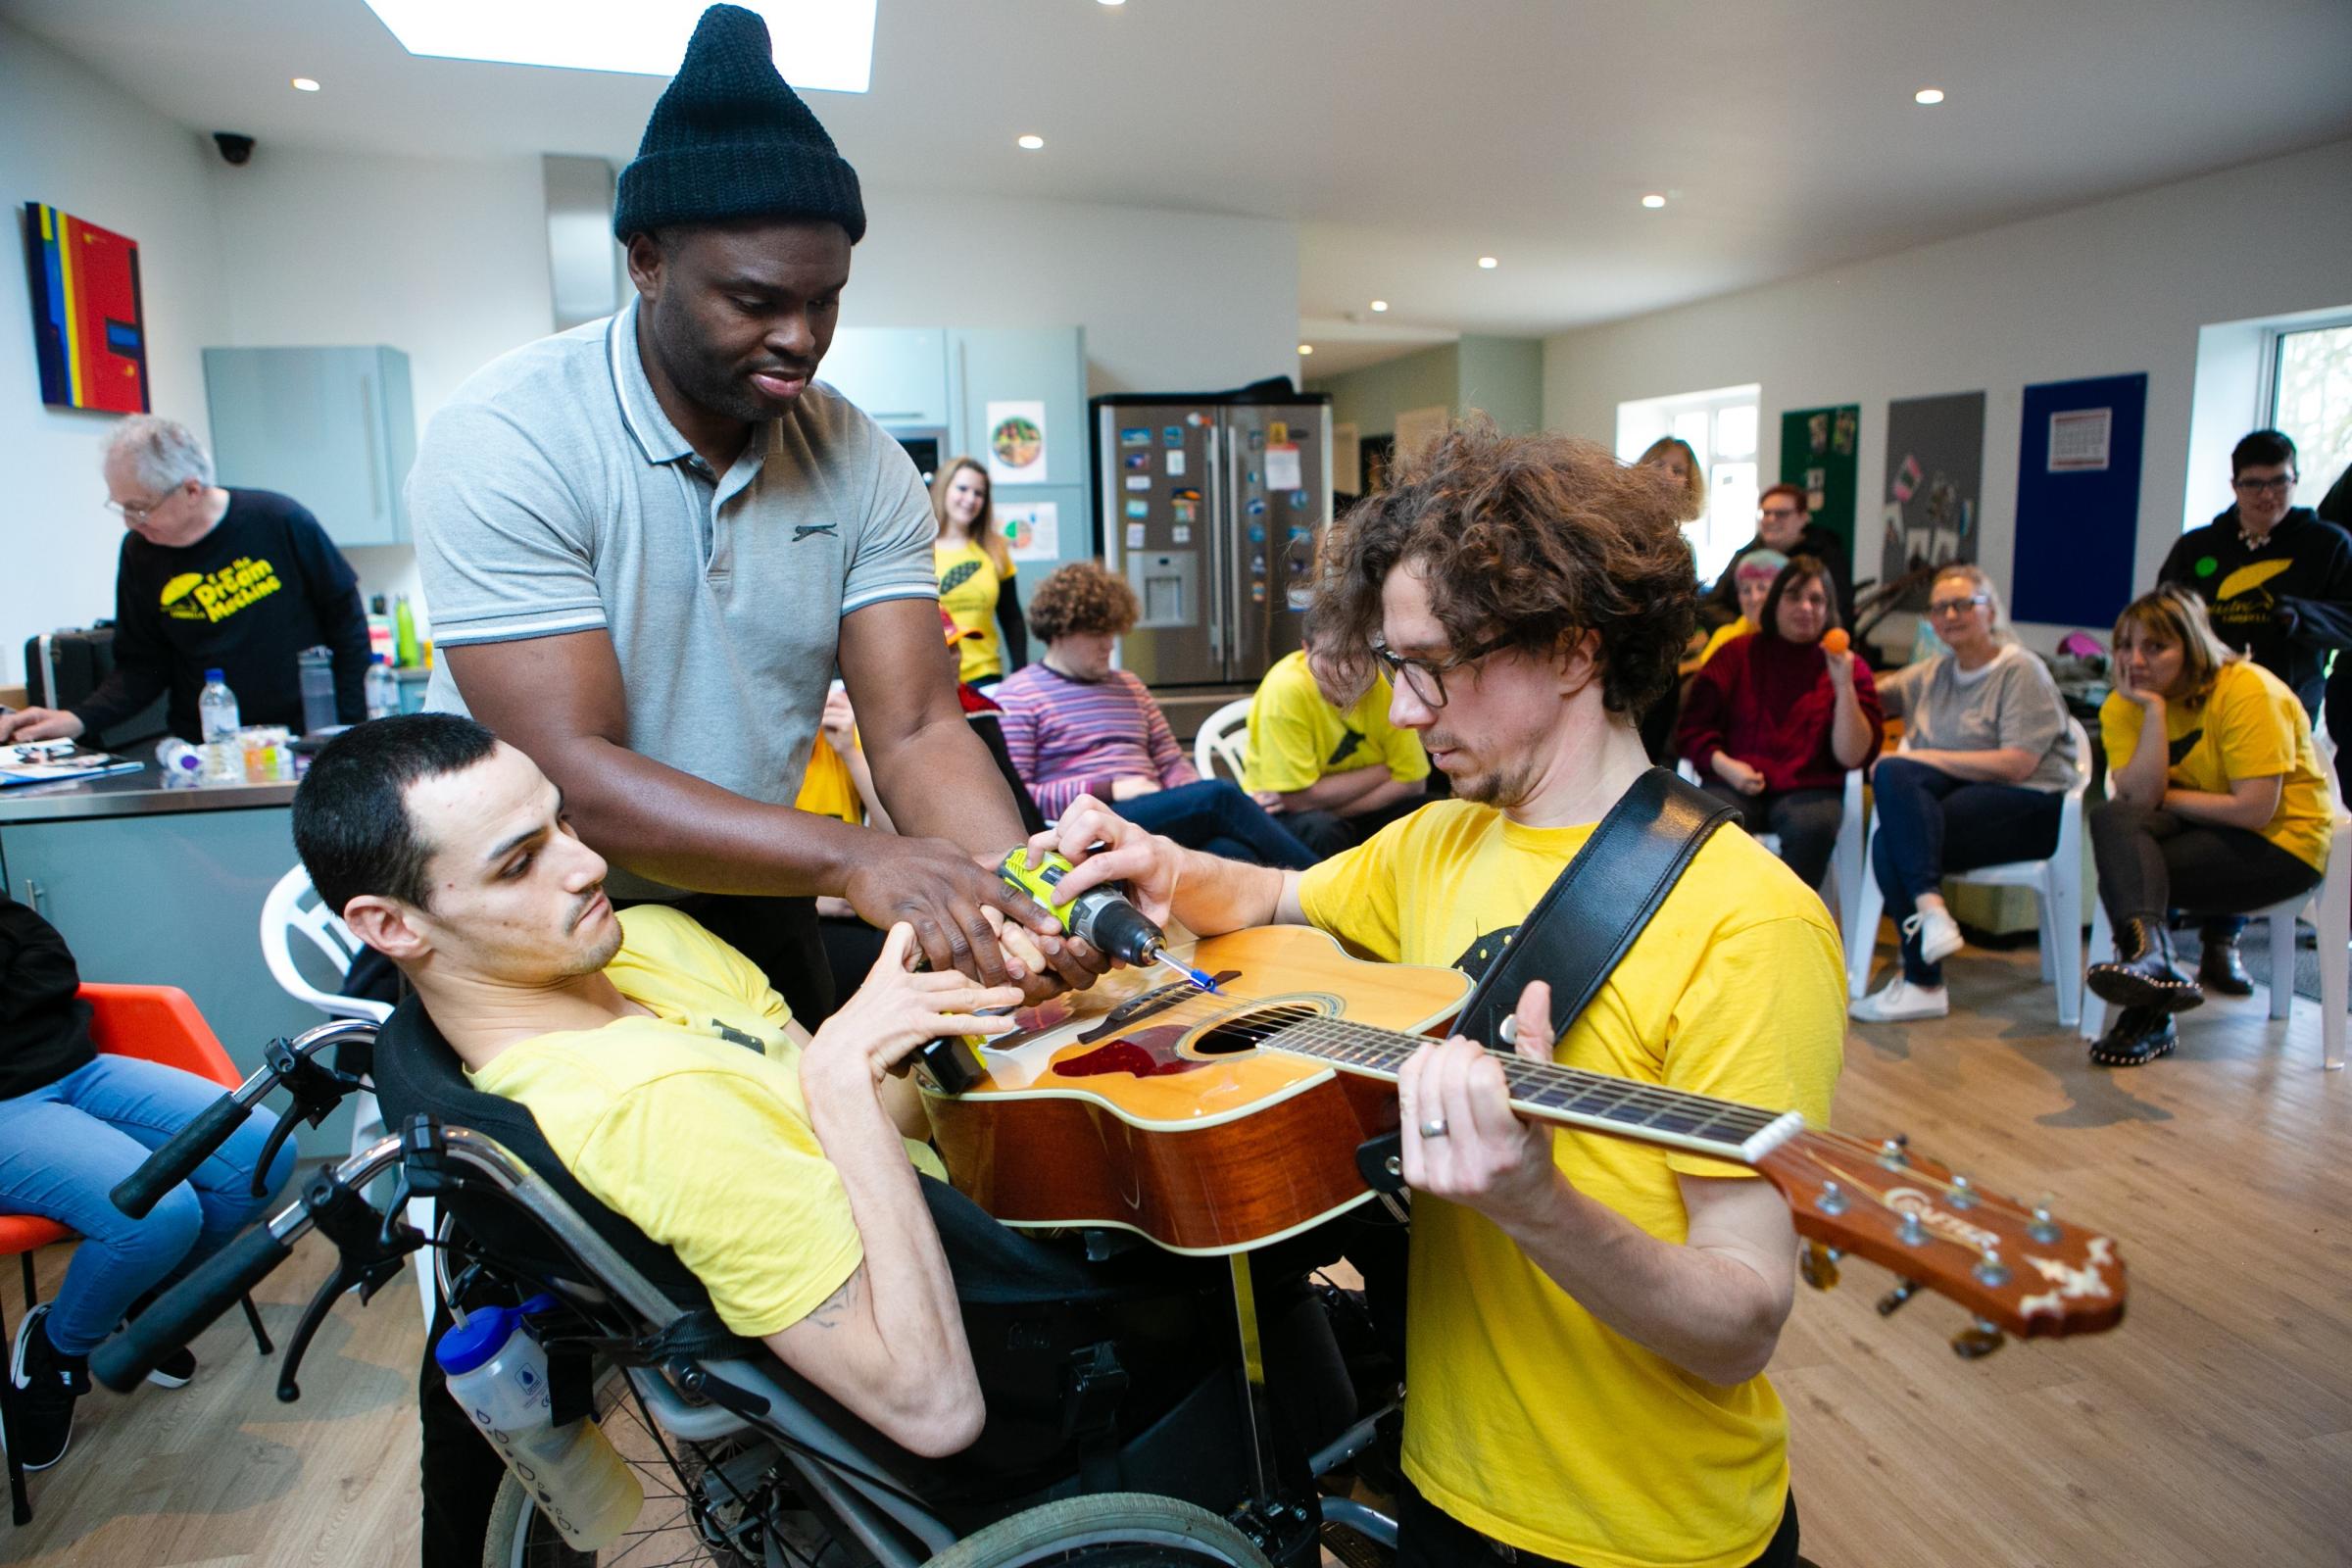 • Electric Umbrella is a collaboration of professional musicians and learning-disabled people. Since the start of the pandemic they provided daily online interactive sessions, including singalongs, song writing, open mic nights and club nights.